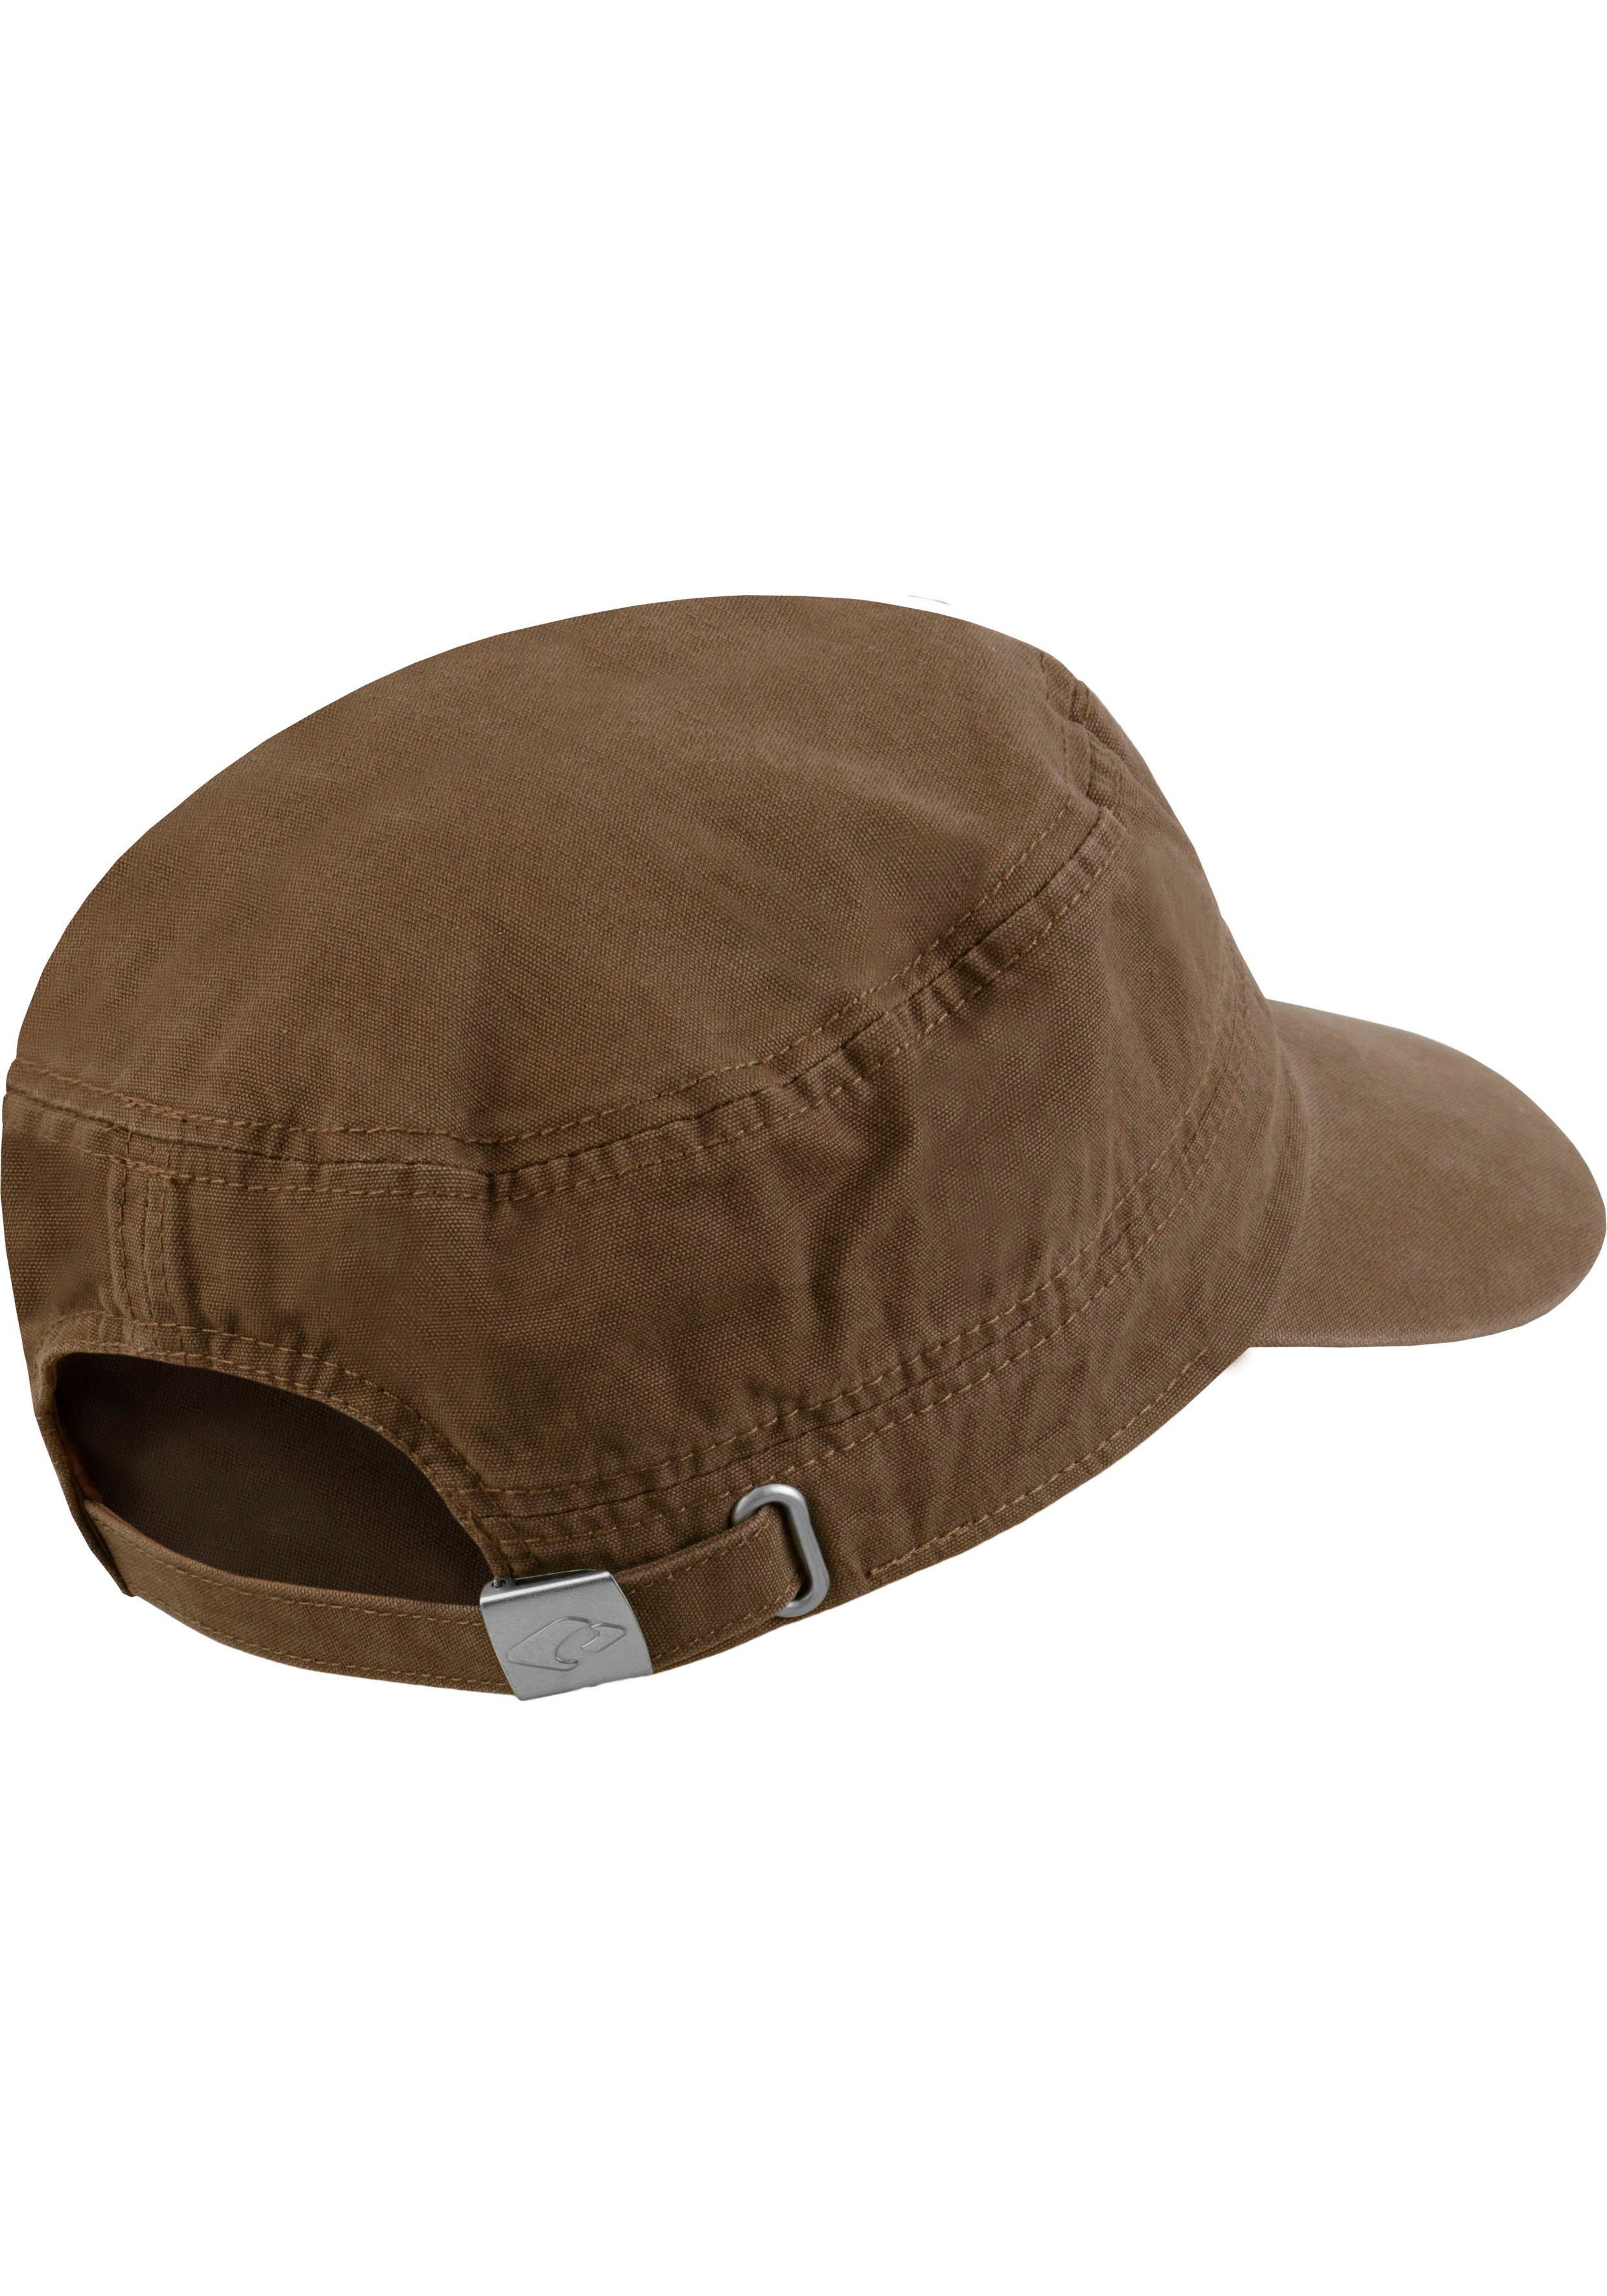 braun Mililtary-Style Cap Dublin Cap Hat im chillouts Army